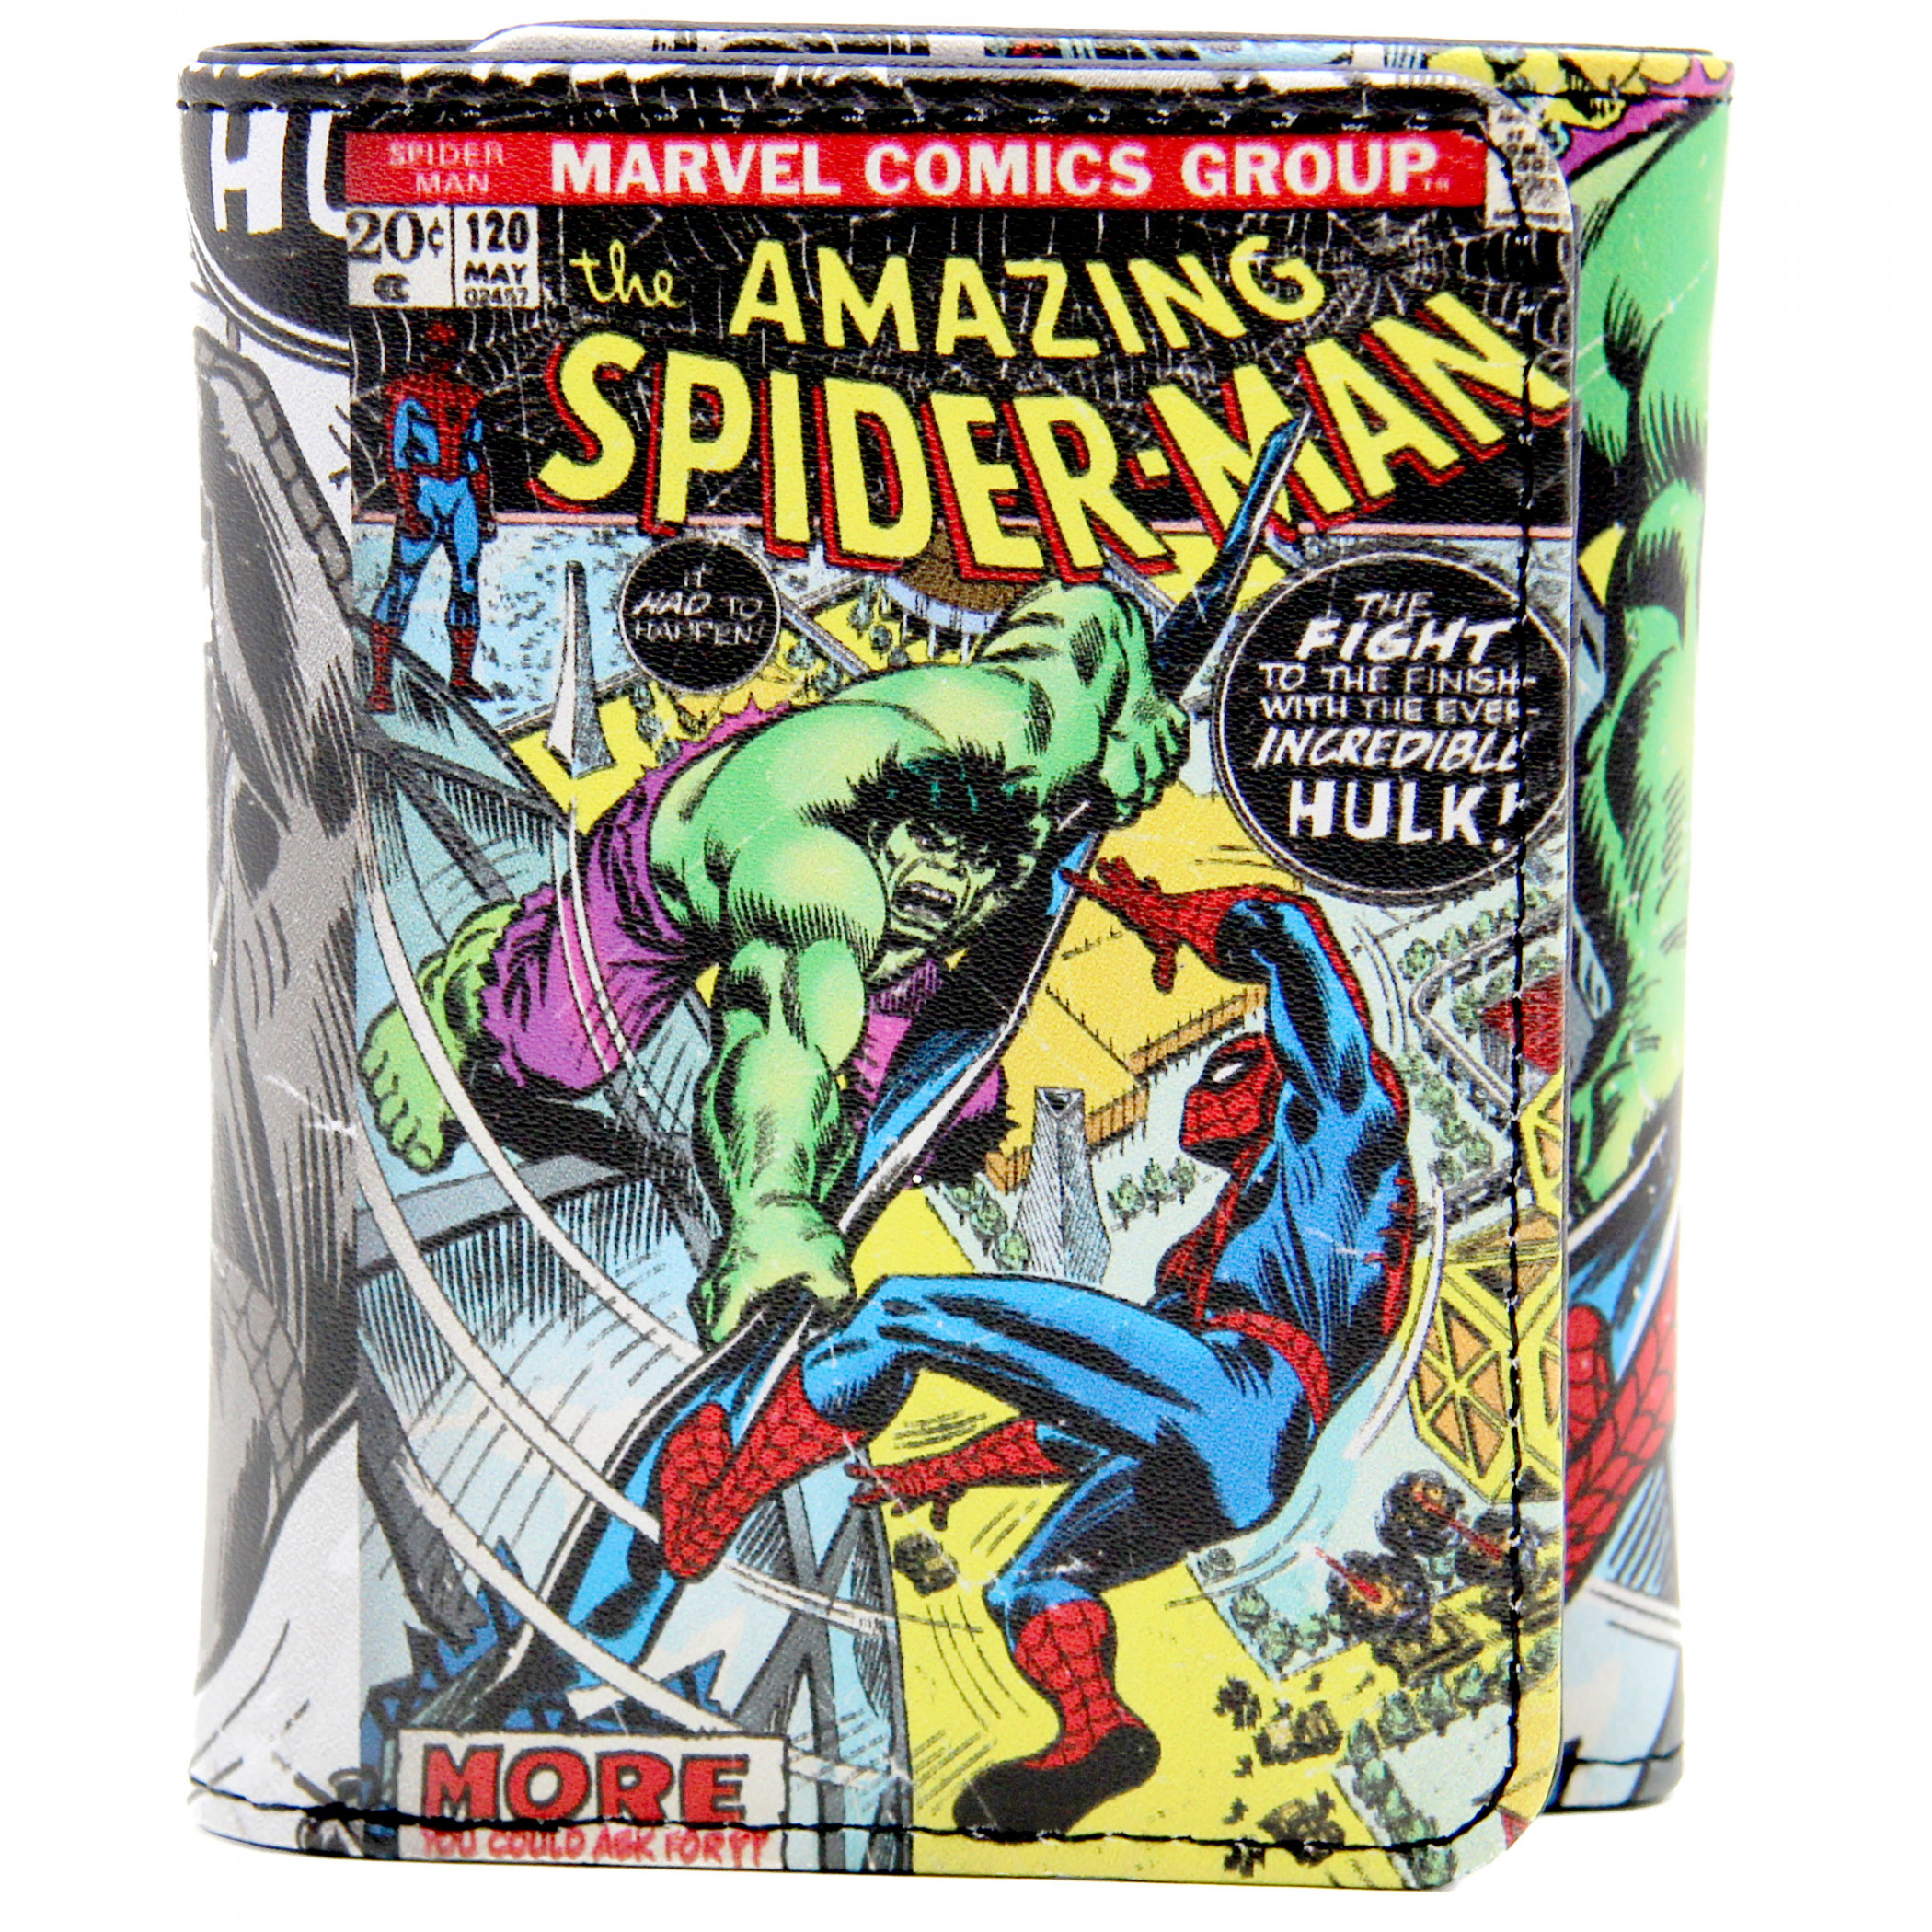 Spider-Man and The Incredible Hulk #120 Comic Cover Trifold Wallet in Collectors Tin